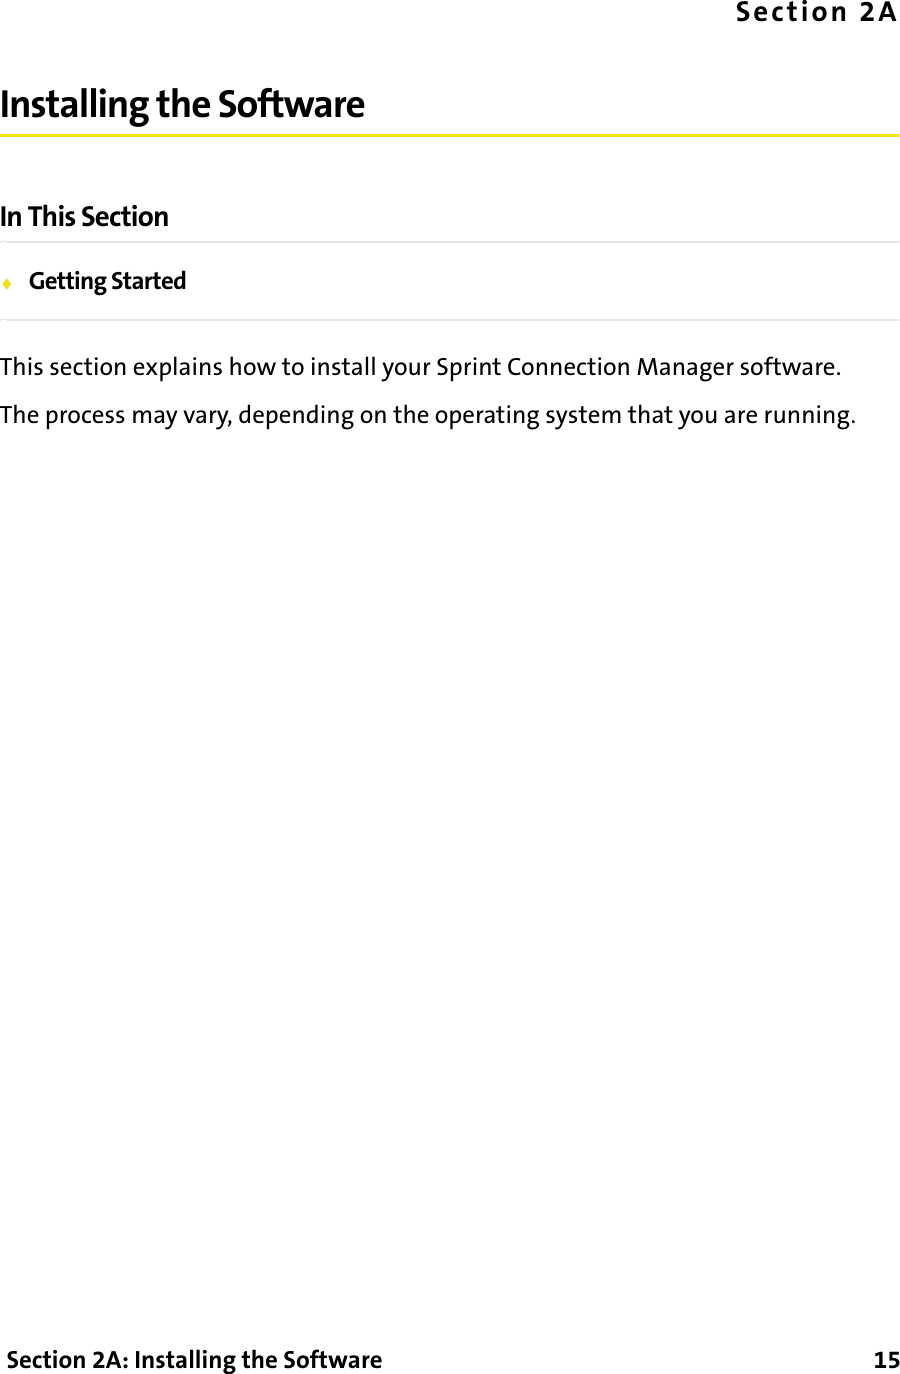  Section 2A: Installing the Software      15Section 2AInstalling the SoftwareIn This Section⽧Getting StartedThis section explains how to install your Sprint Connection Manager software.The process may vary, depending on the operating system that you are running.